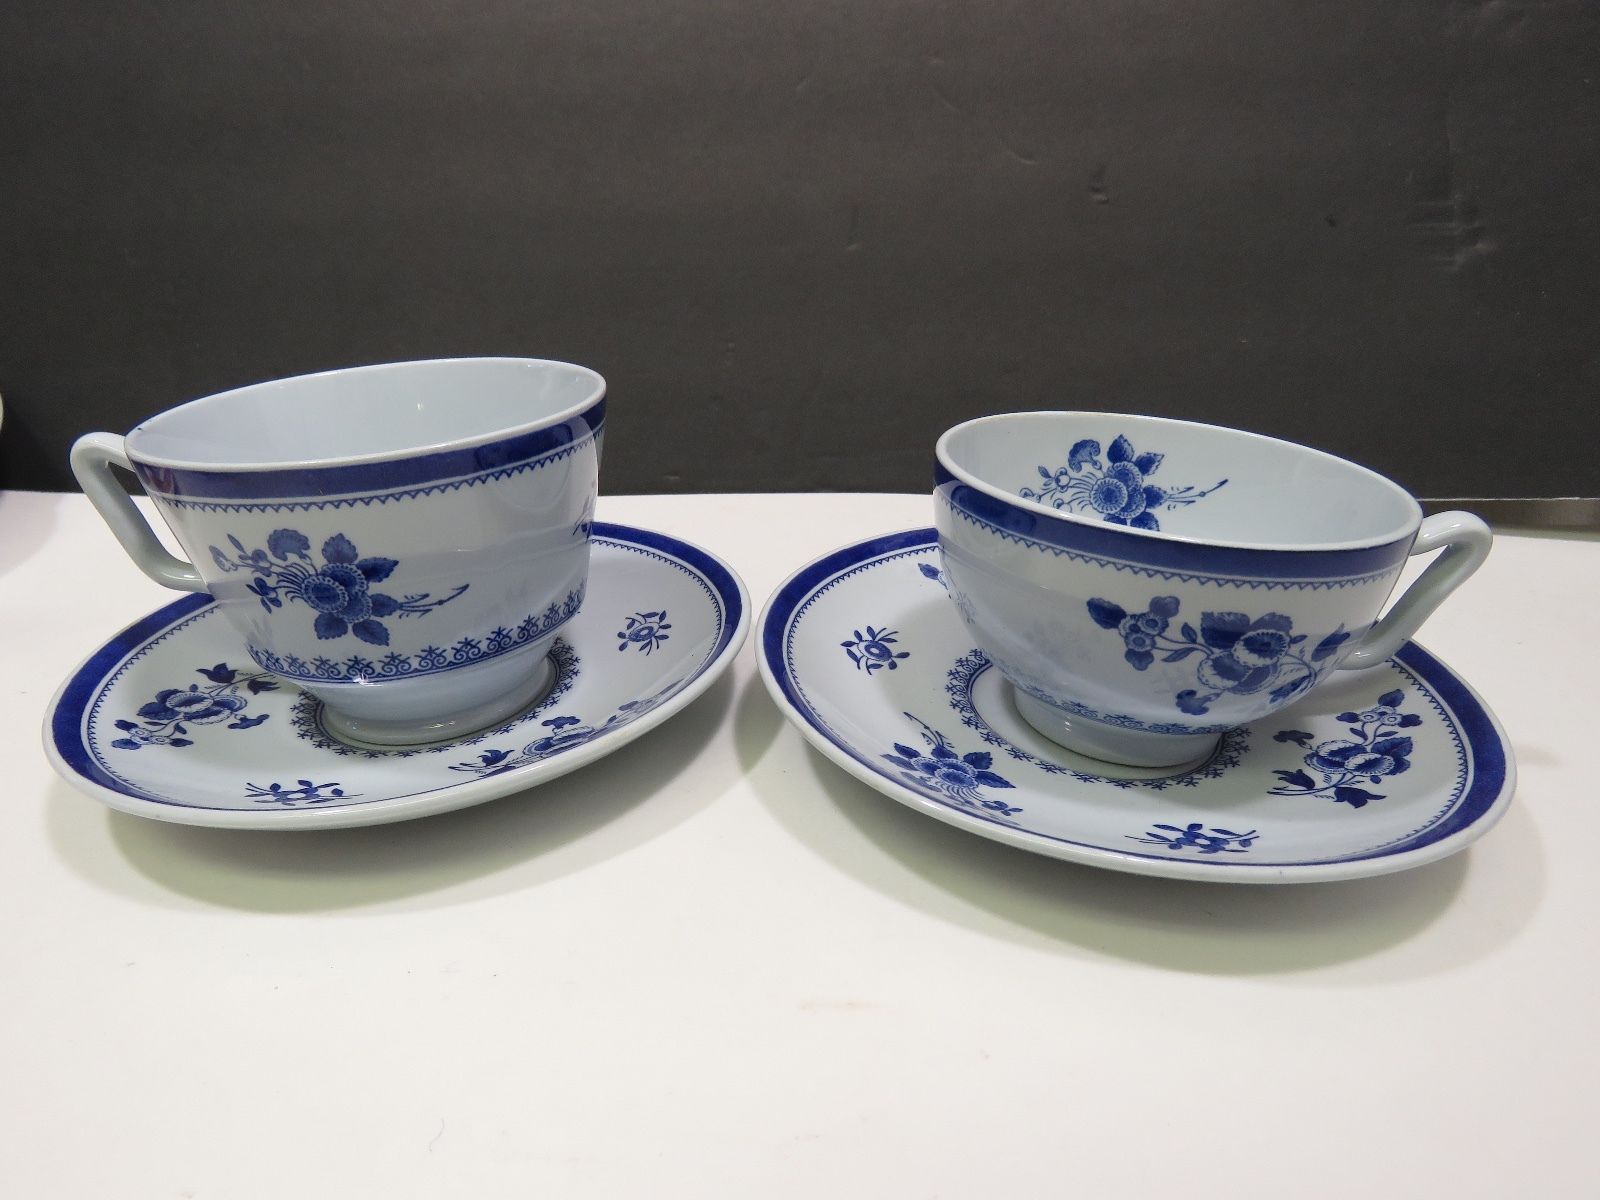 Set of 2 Different Shaped Copeland Spode Spodes Gloucester Cups and Saucers - $27.72